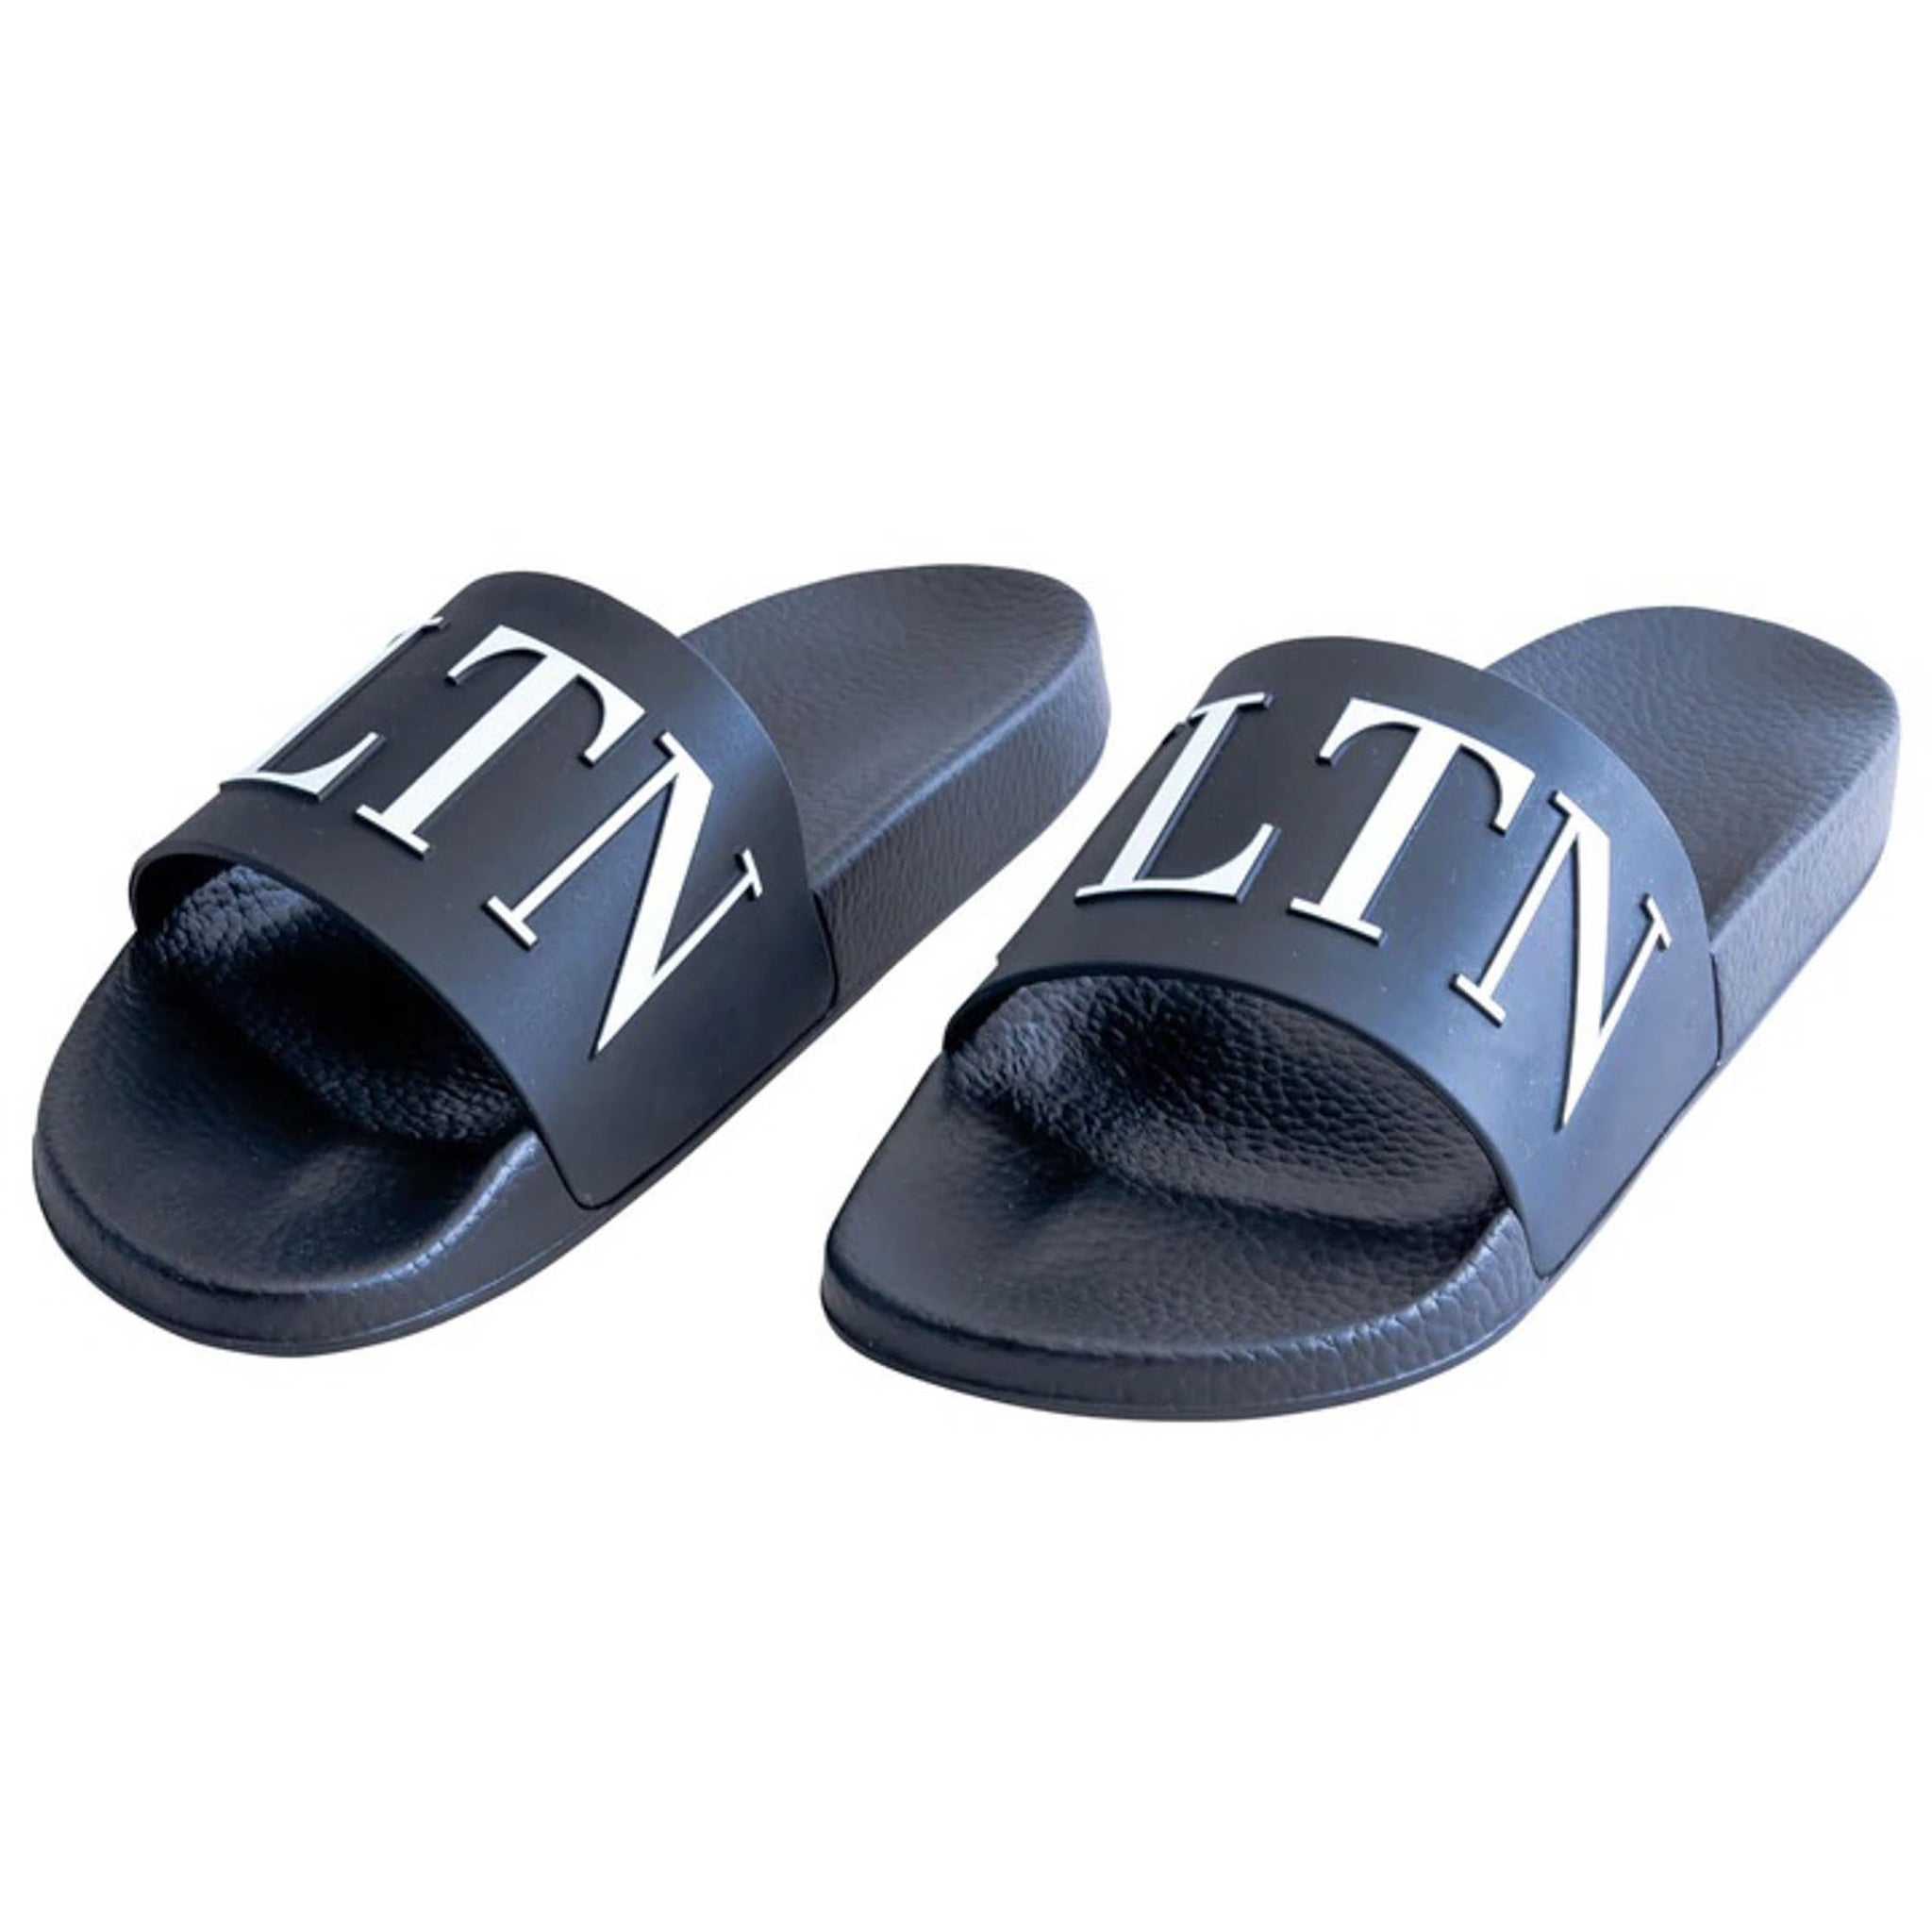 This stylish Valentino Garavani rubber sandal is perfect for any casual occasion. It features a bold VLTN band on the front, creating a standout finish. The sandal has a rubber sole for comfort and durability, and is made in Italy. It comes in a classic black colour and is part of the SS22 collection.